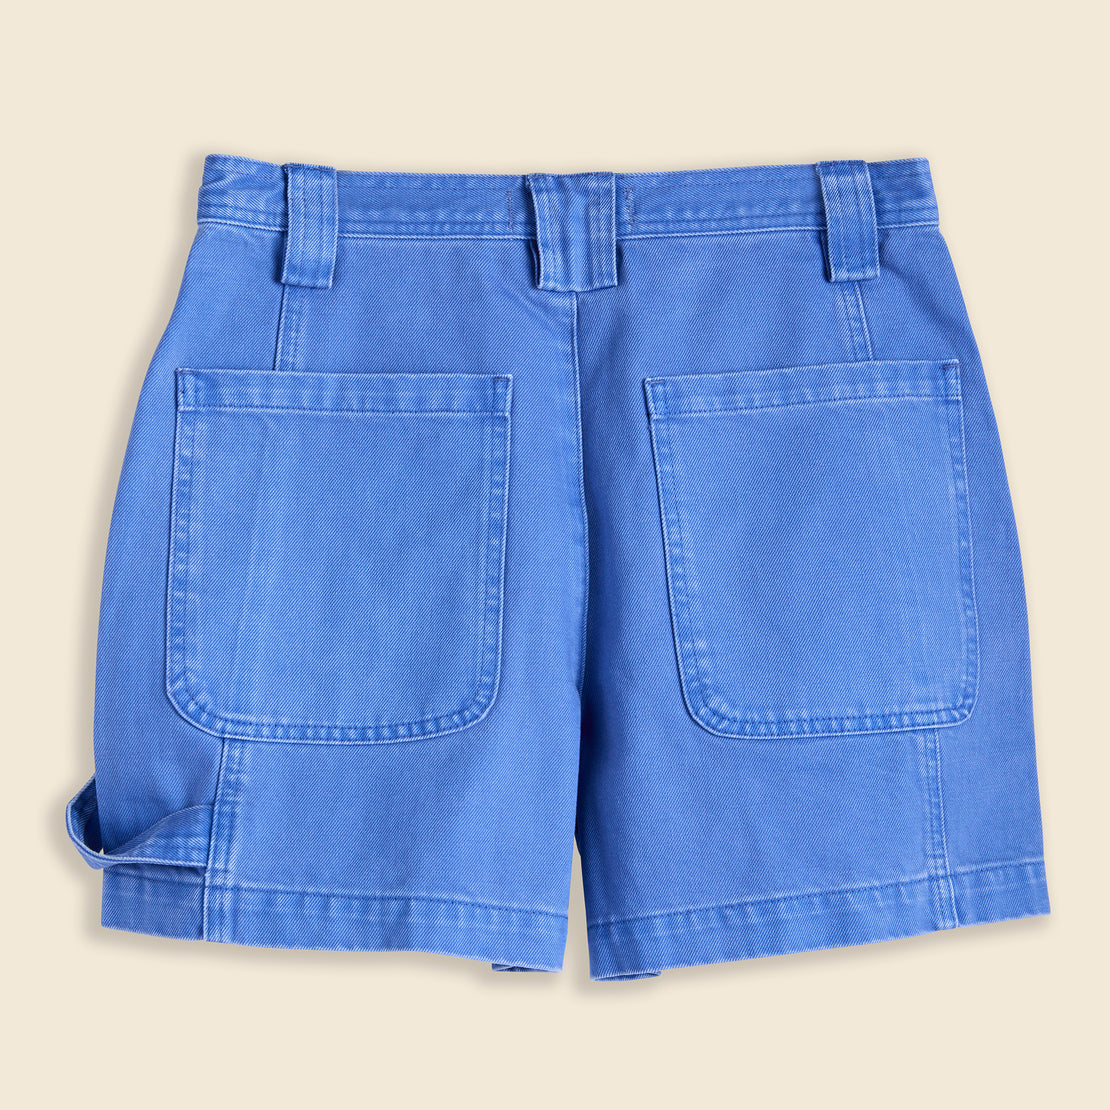 Phoebe Short in Denim - French Blue - Alex Mill - STAG Provisions - W - Shorts - Solid